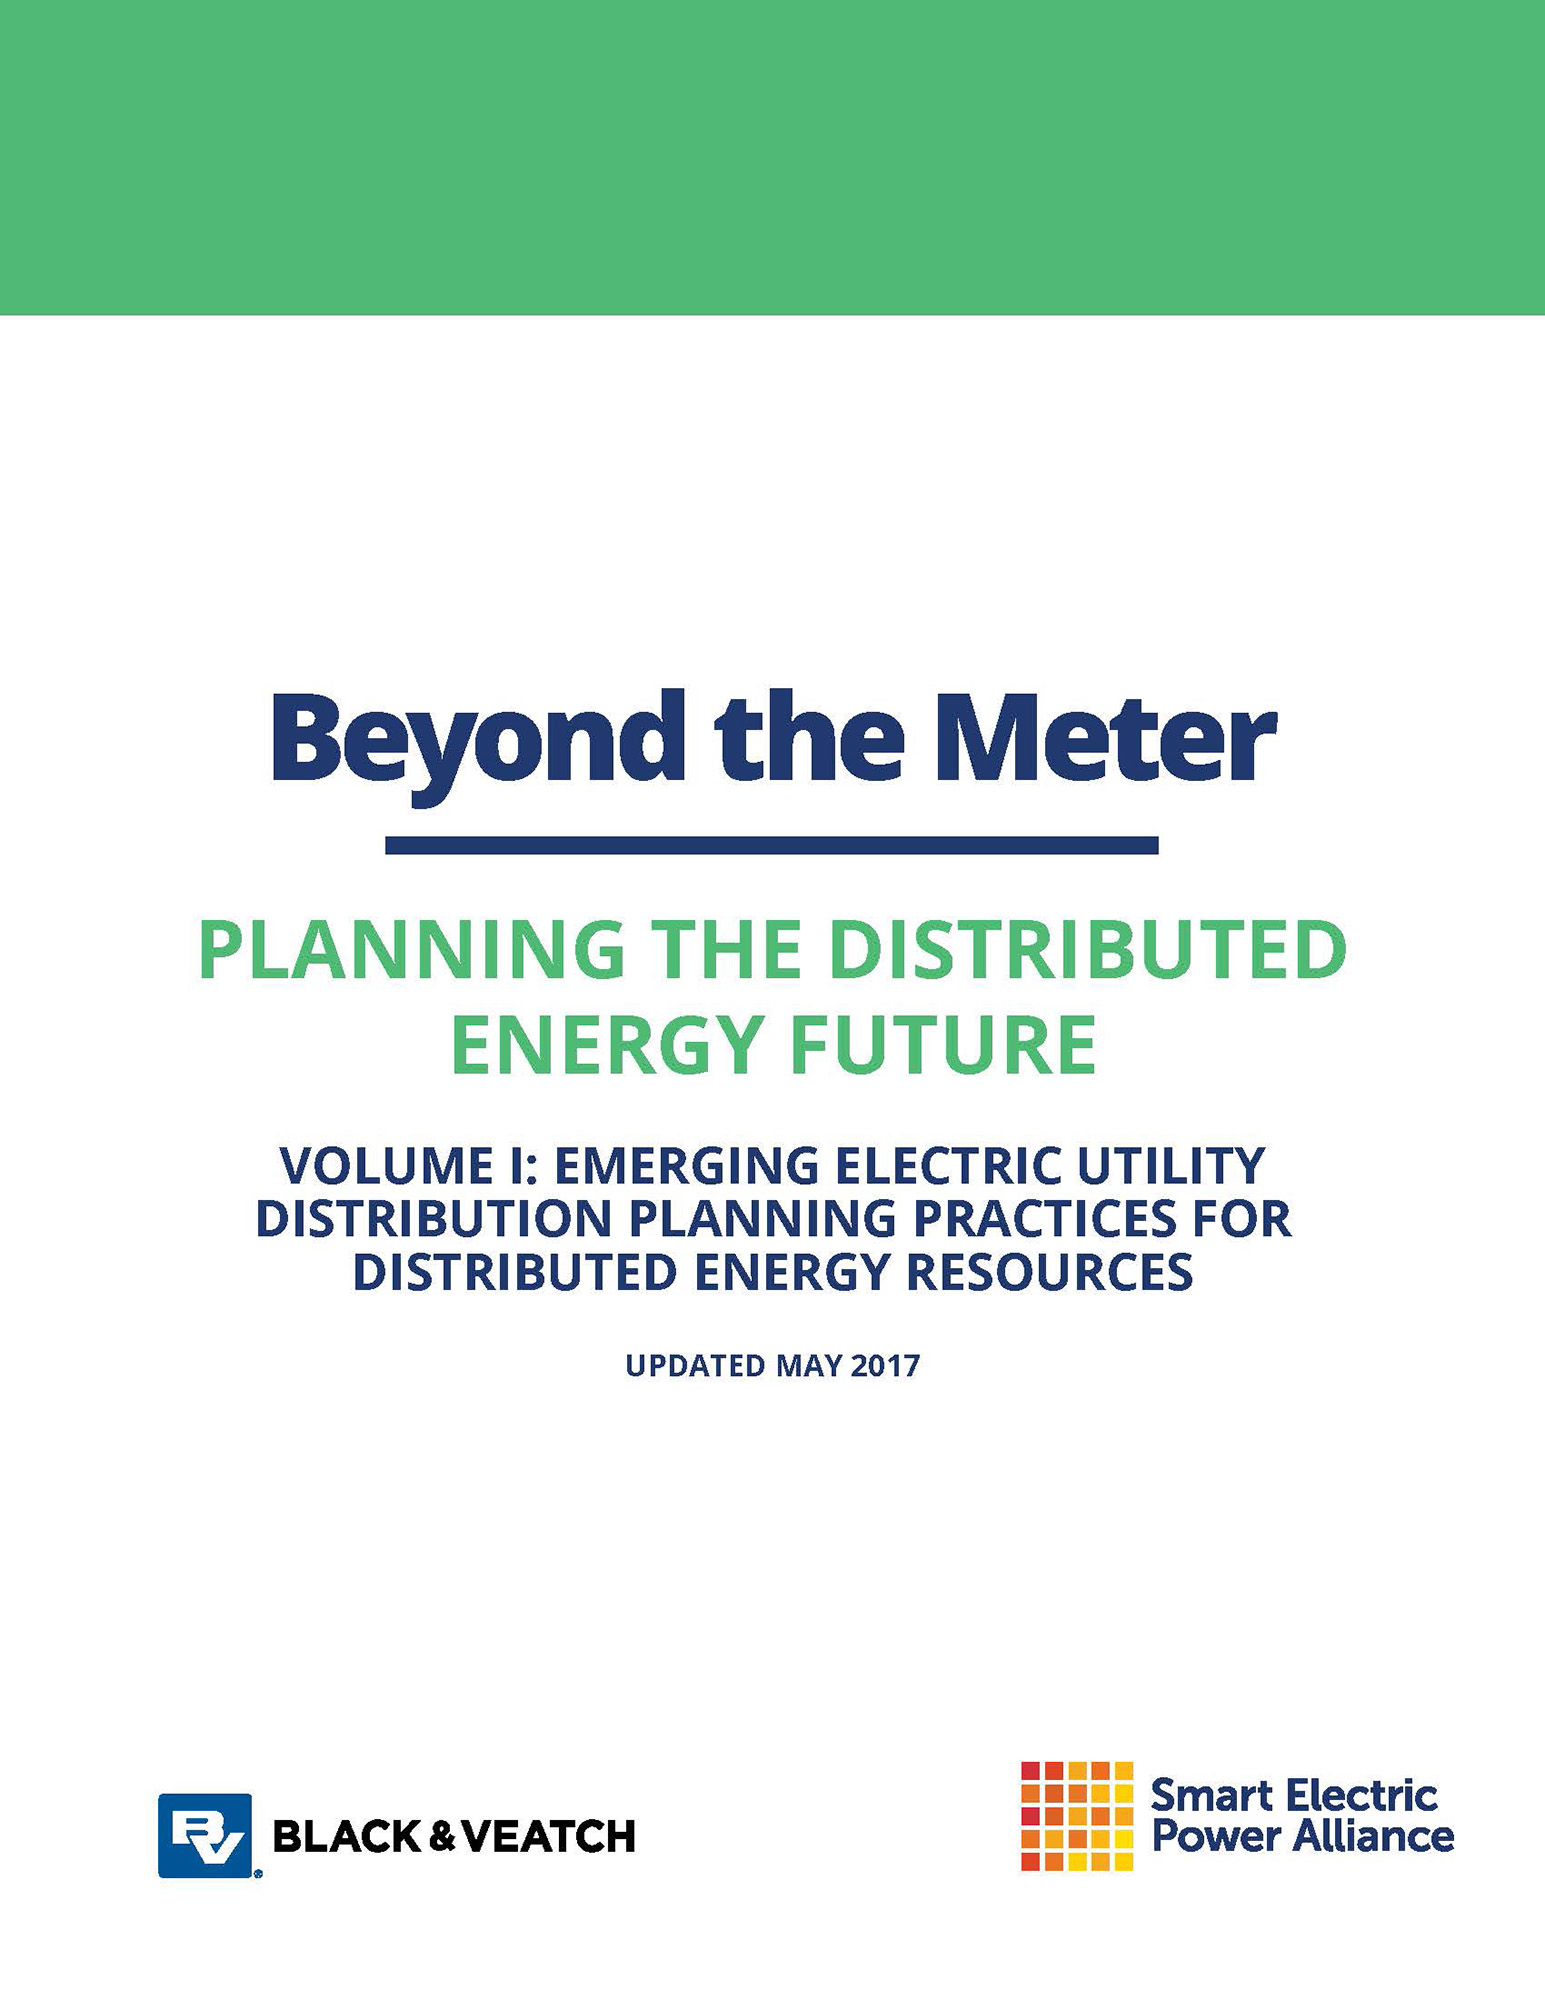 Beyond the Meter: Planning the Distributed Energy Future, Volume I: Emerging Electric Utility Distribution Planning Practices for Distributed Energy Resources